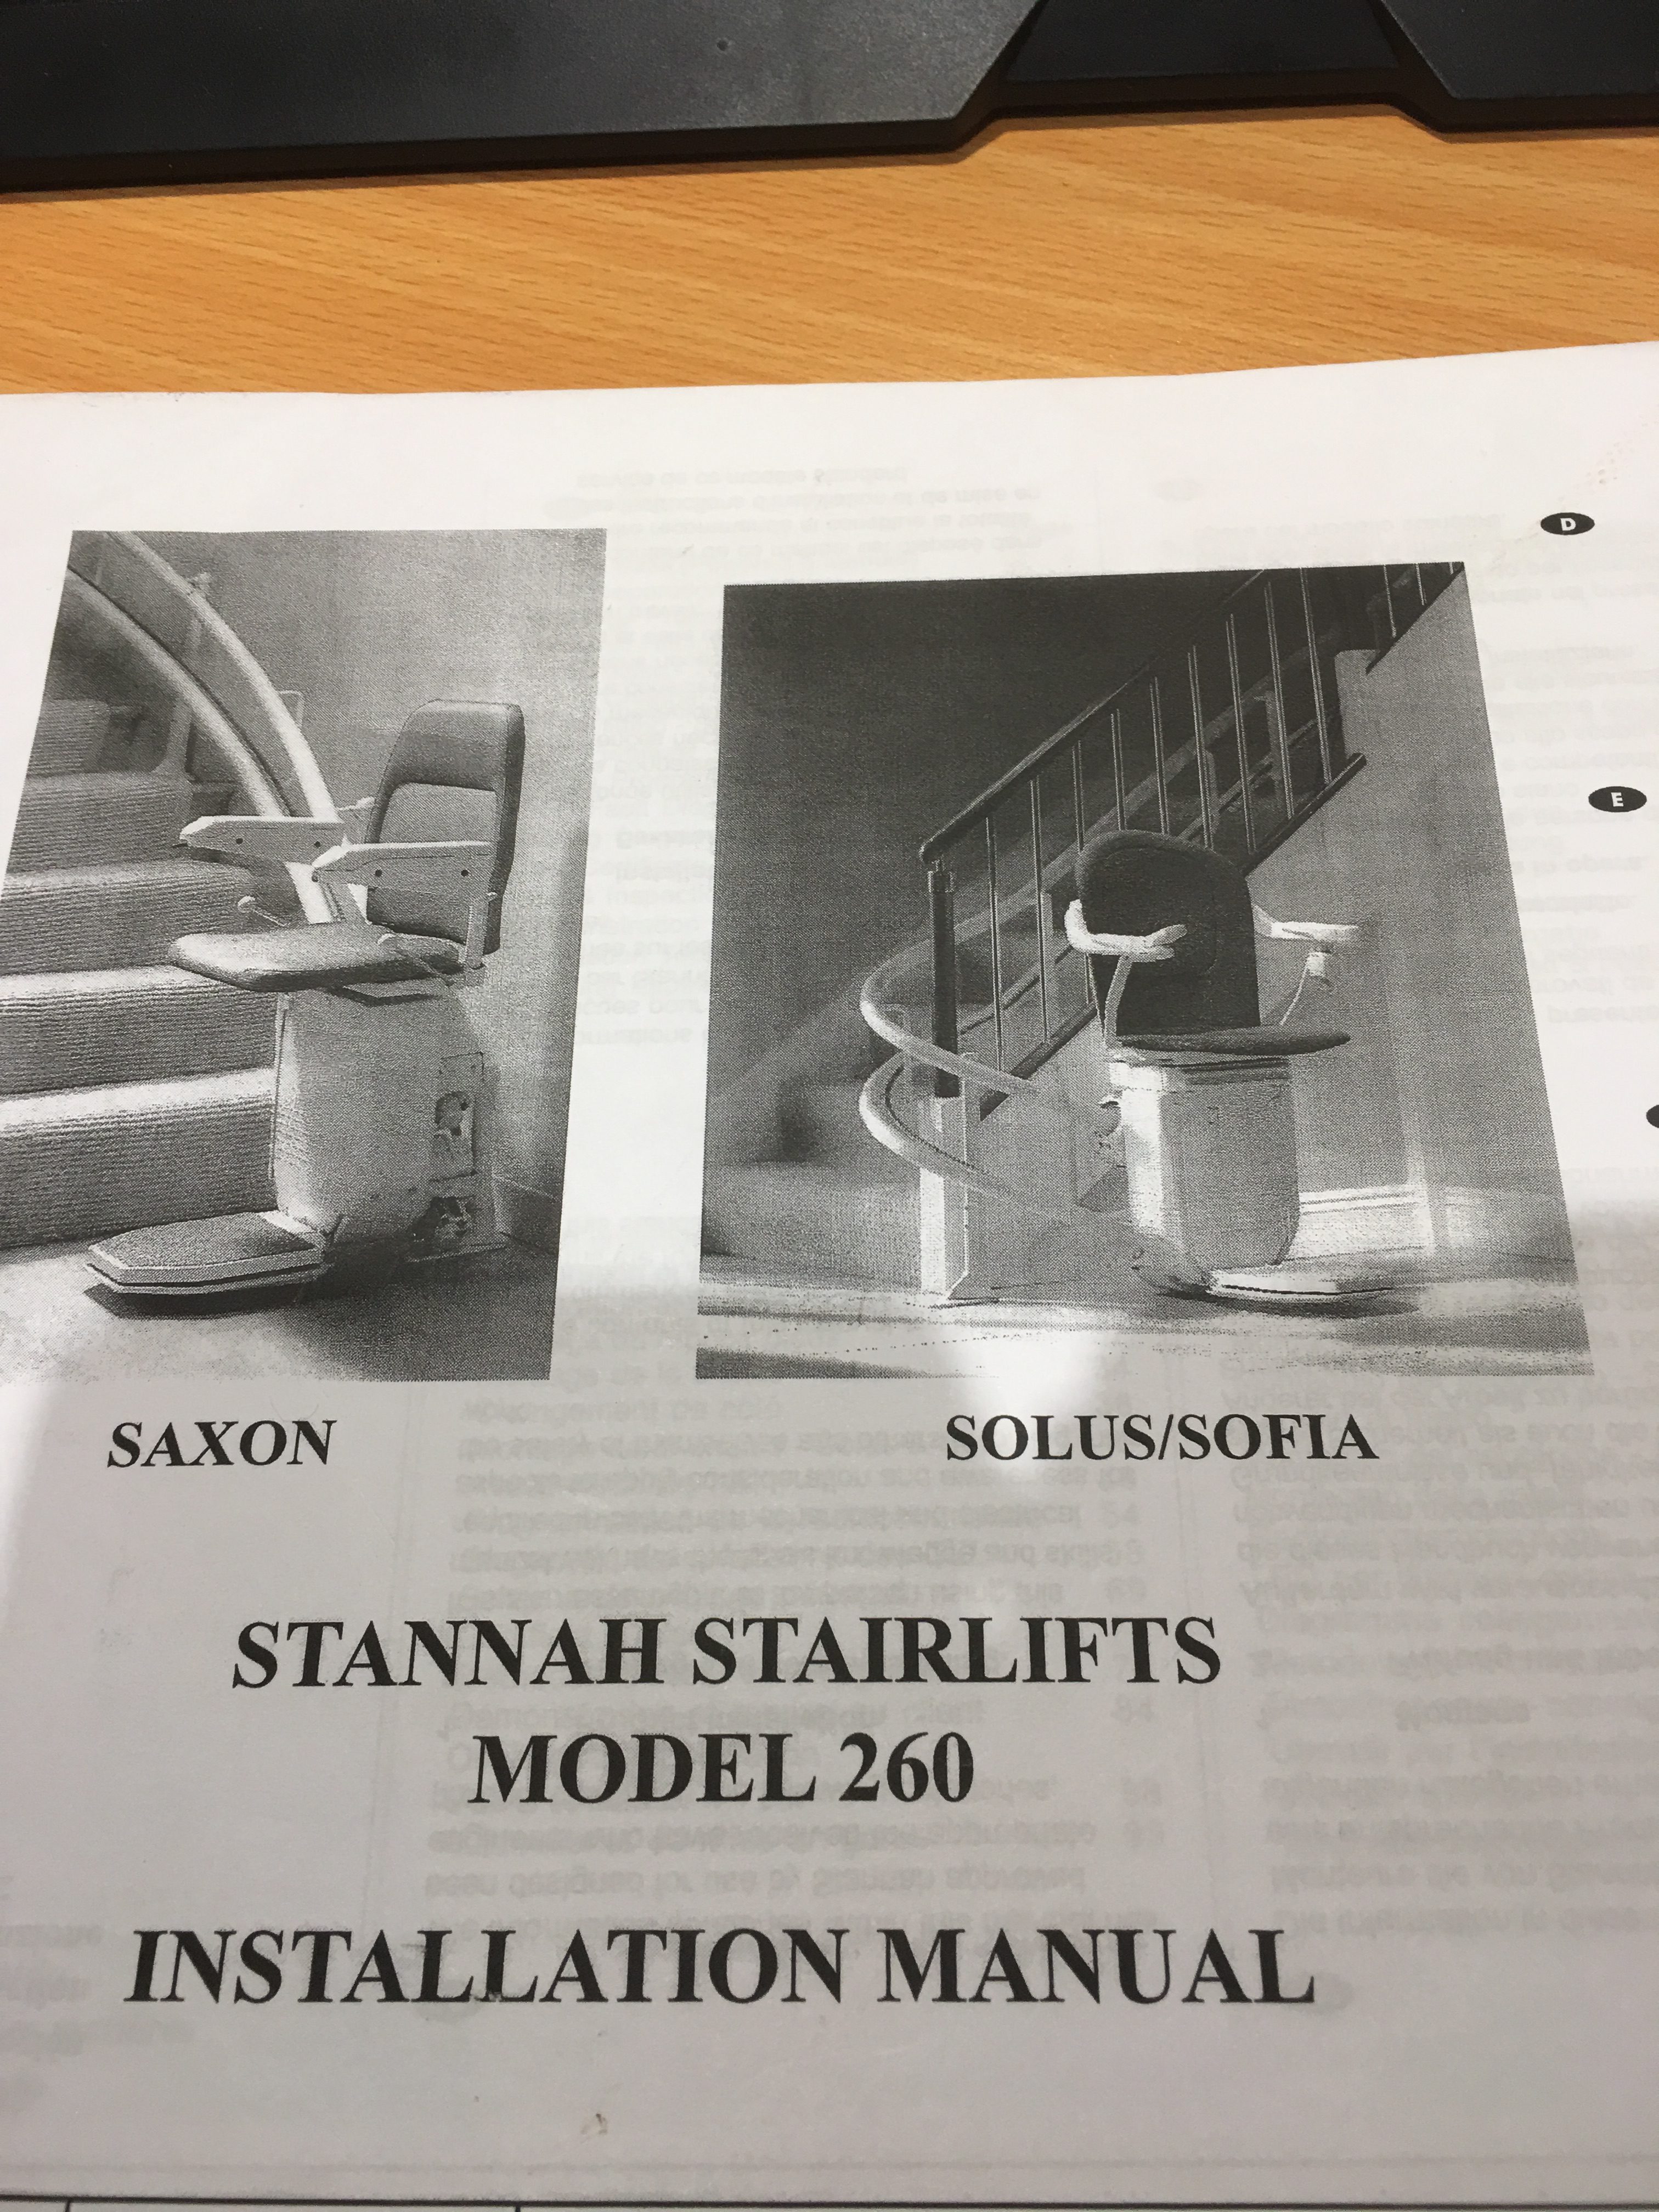 stannah stairlift manual